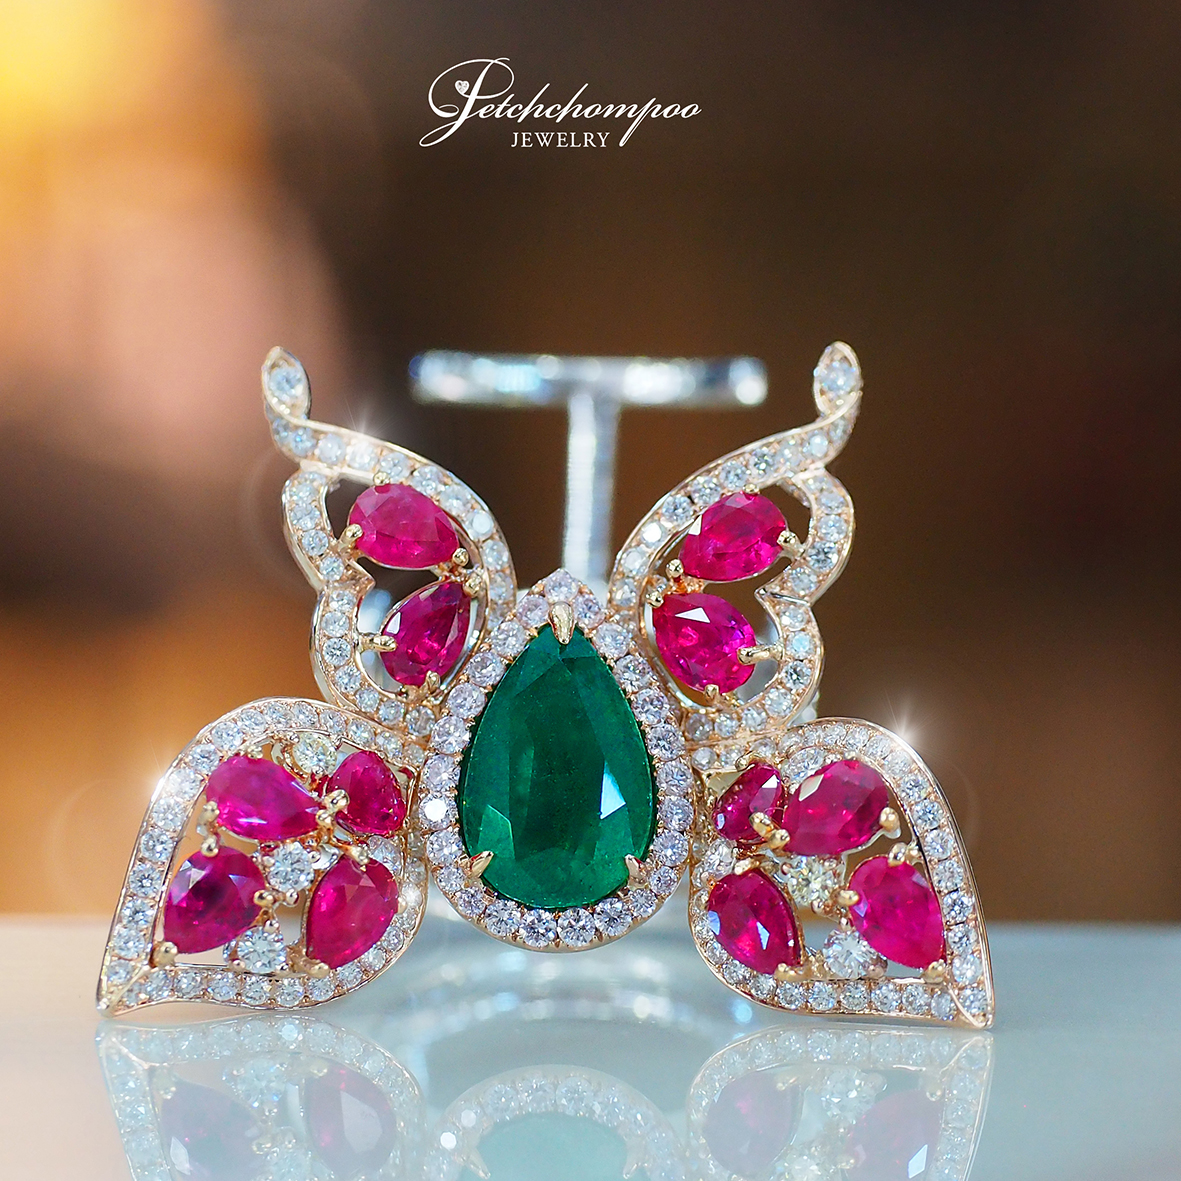 [27424] Butterfly ring set with emeralds and rubies set with diamonds.  199,000 